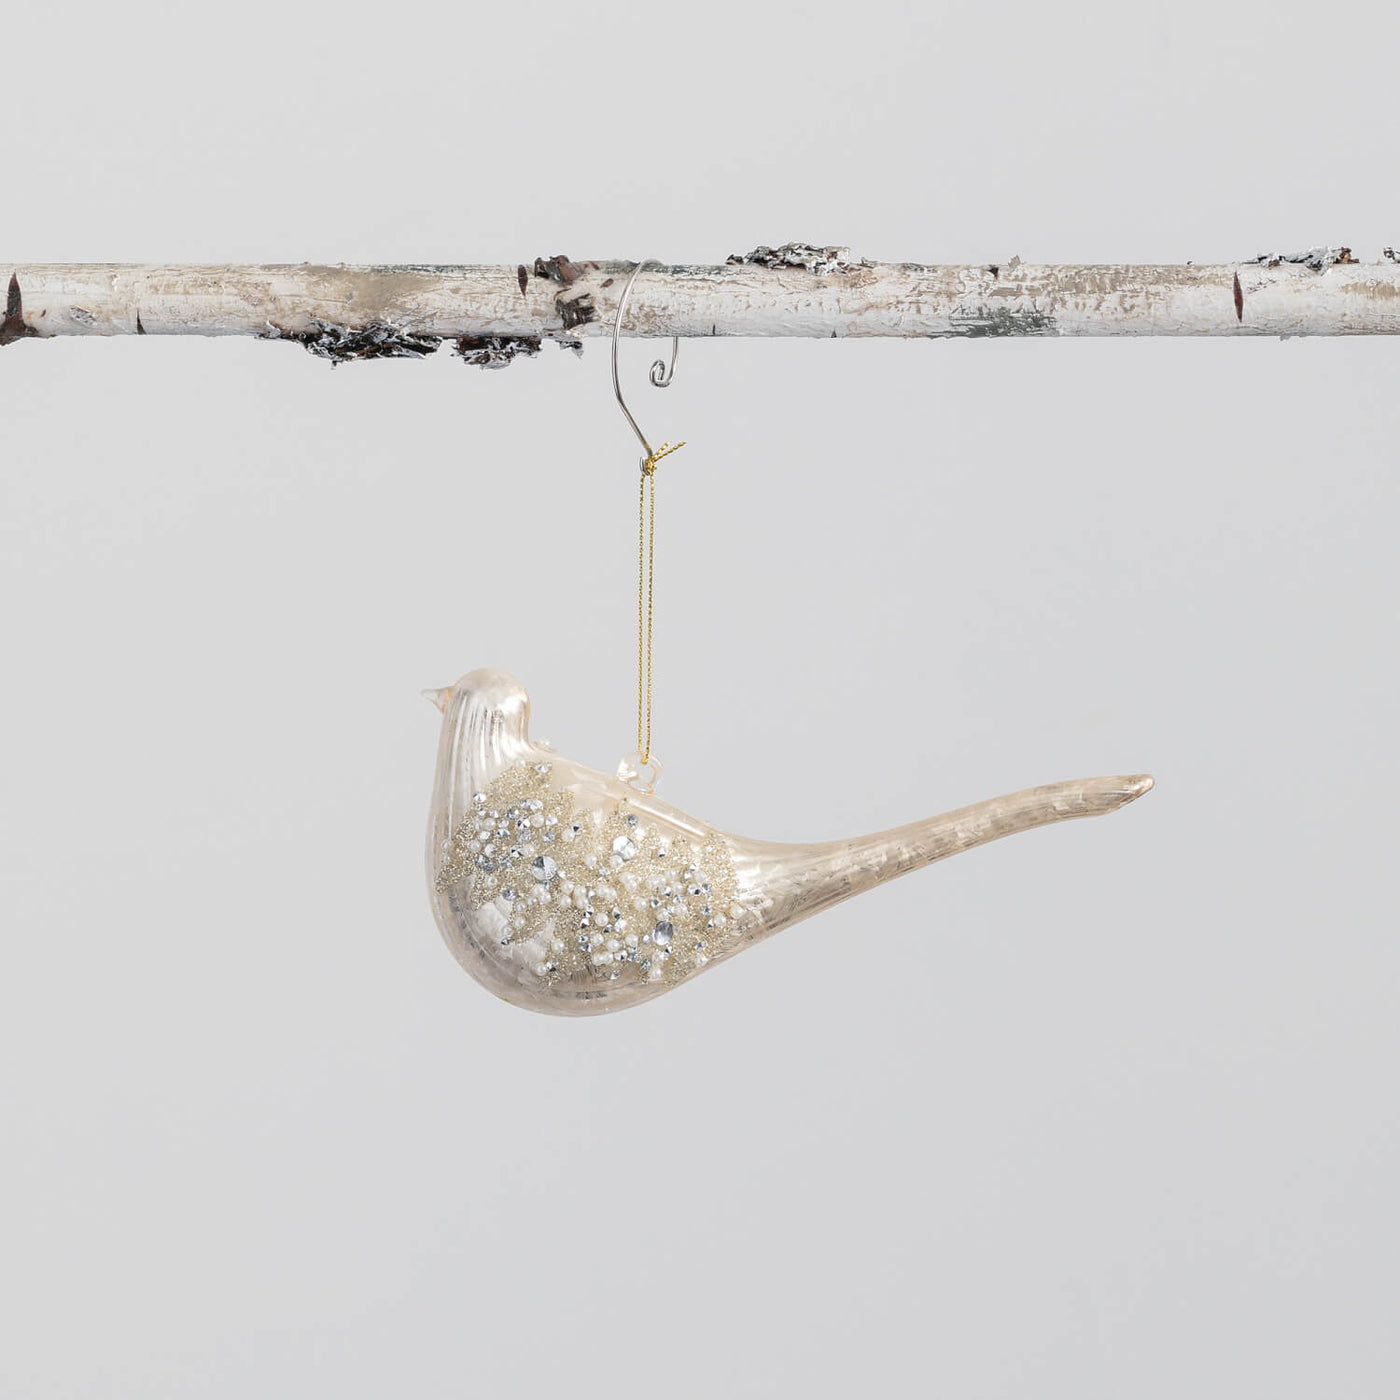 Beaded Bird Ornament-Home/Giftware-IVORY-Kevin's Fine Outdoor Gear & Apparel